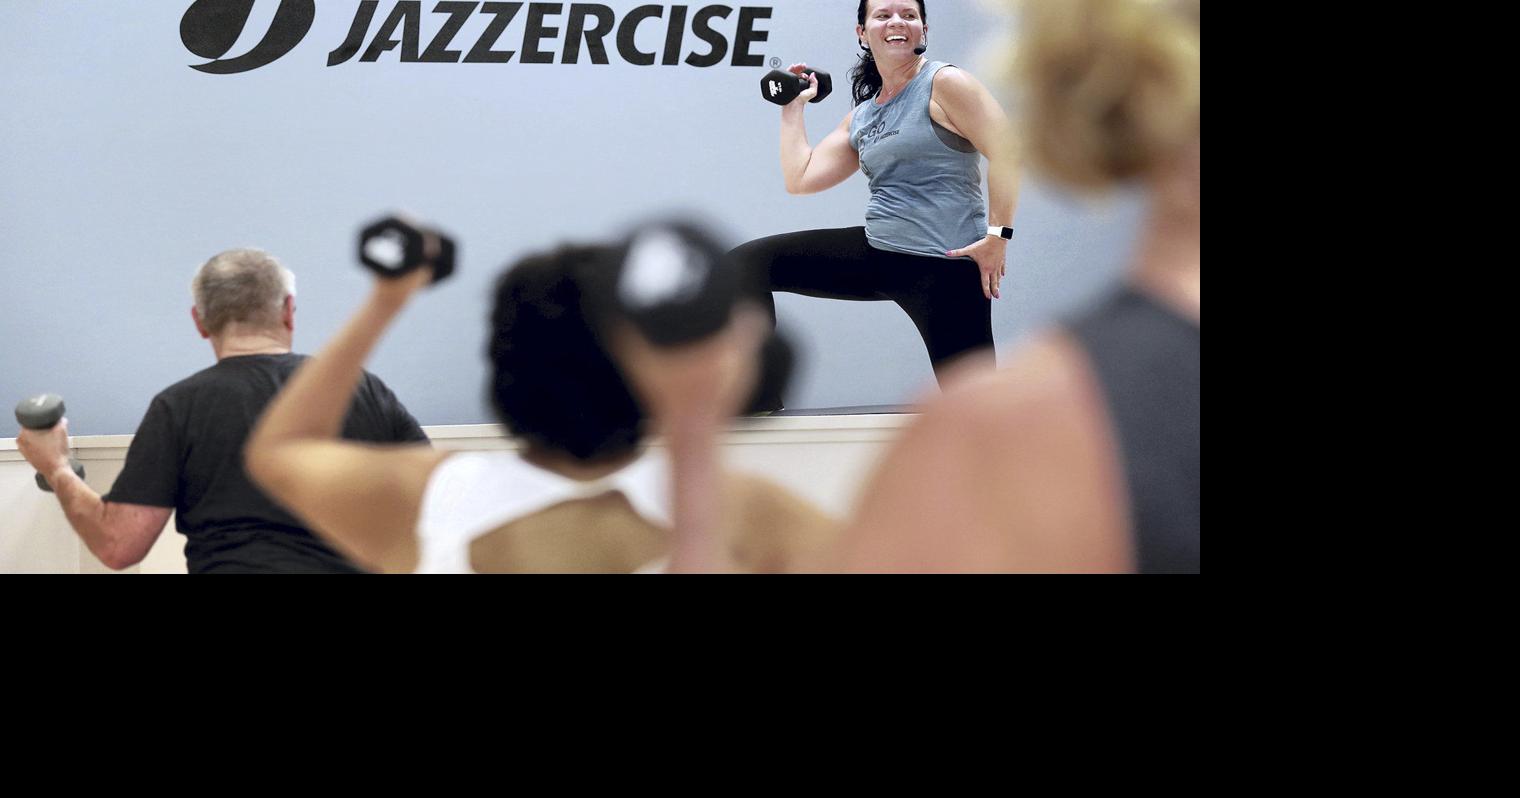 Getting fit for 50 years; Jazzercise celebrates anniversary with new  franchise owners in Grand Island